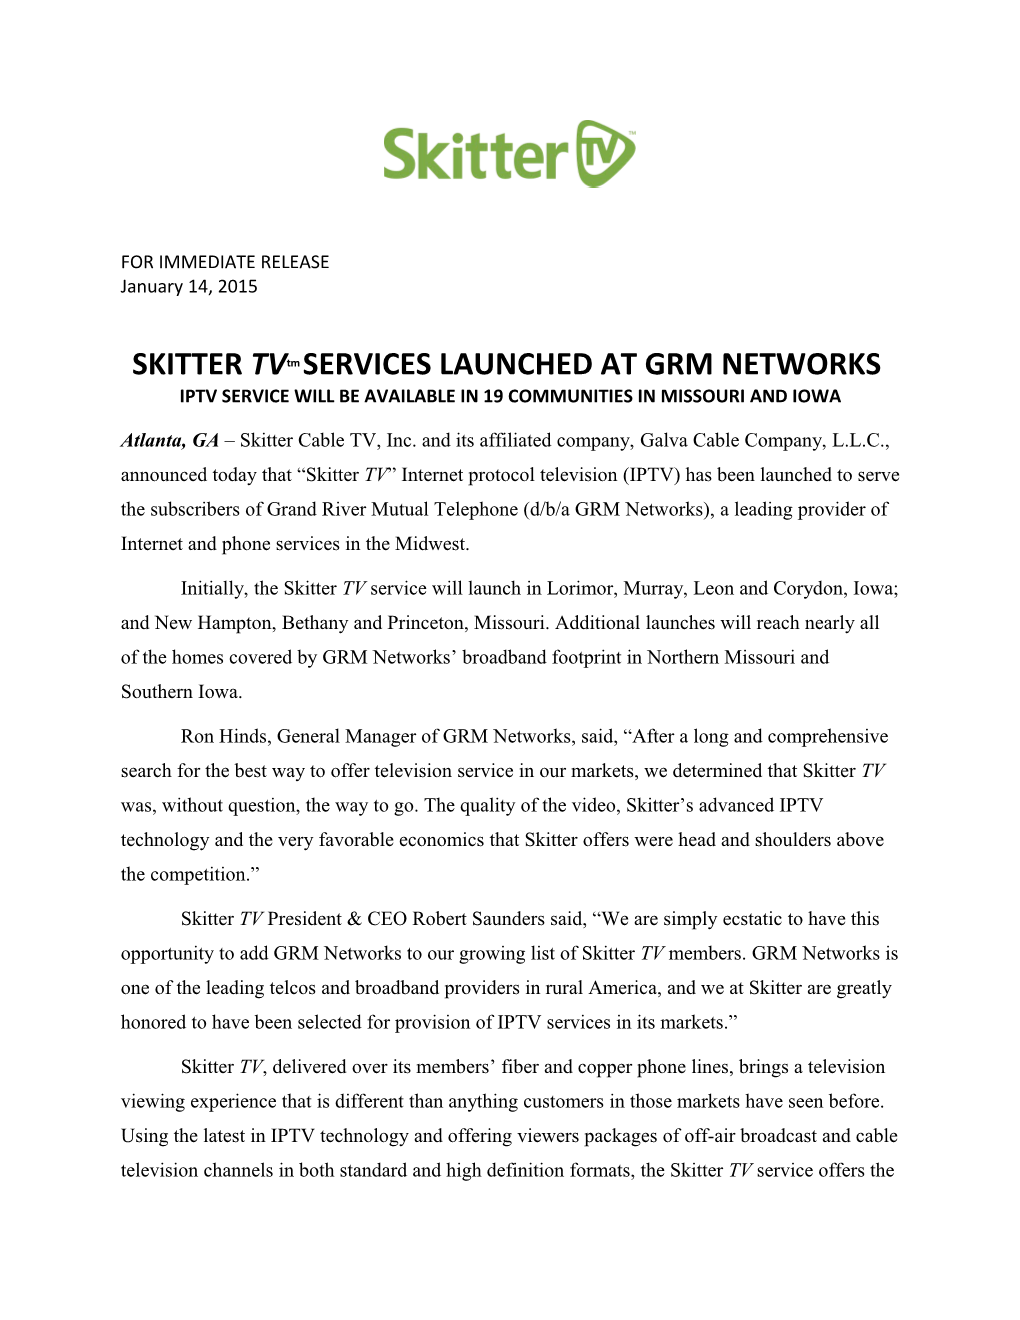 SKITTER Tvtm SERVICES LAUNCHED at GRM NETWORKS